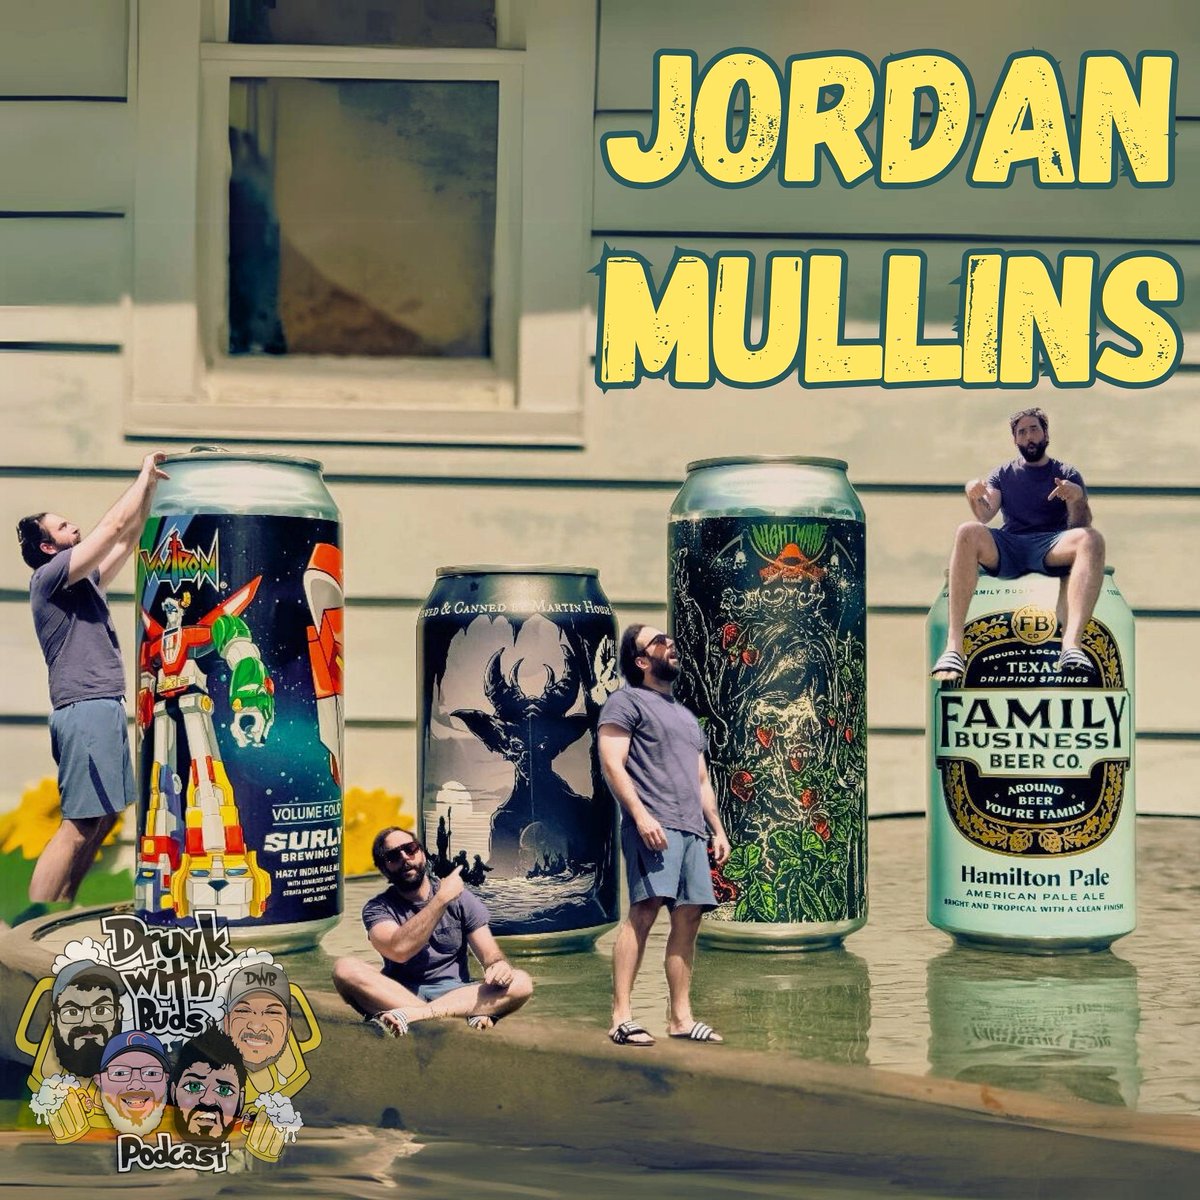 Our latest episode with Actor Jordan Mullins live at FATBIRD is available anywhere you get podcasts 🍻 podcasts.apple.com/us/podcast/act… open.spotify.com/episode/62An8E… buzzsprout.com/467314/subscri…